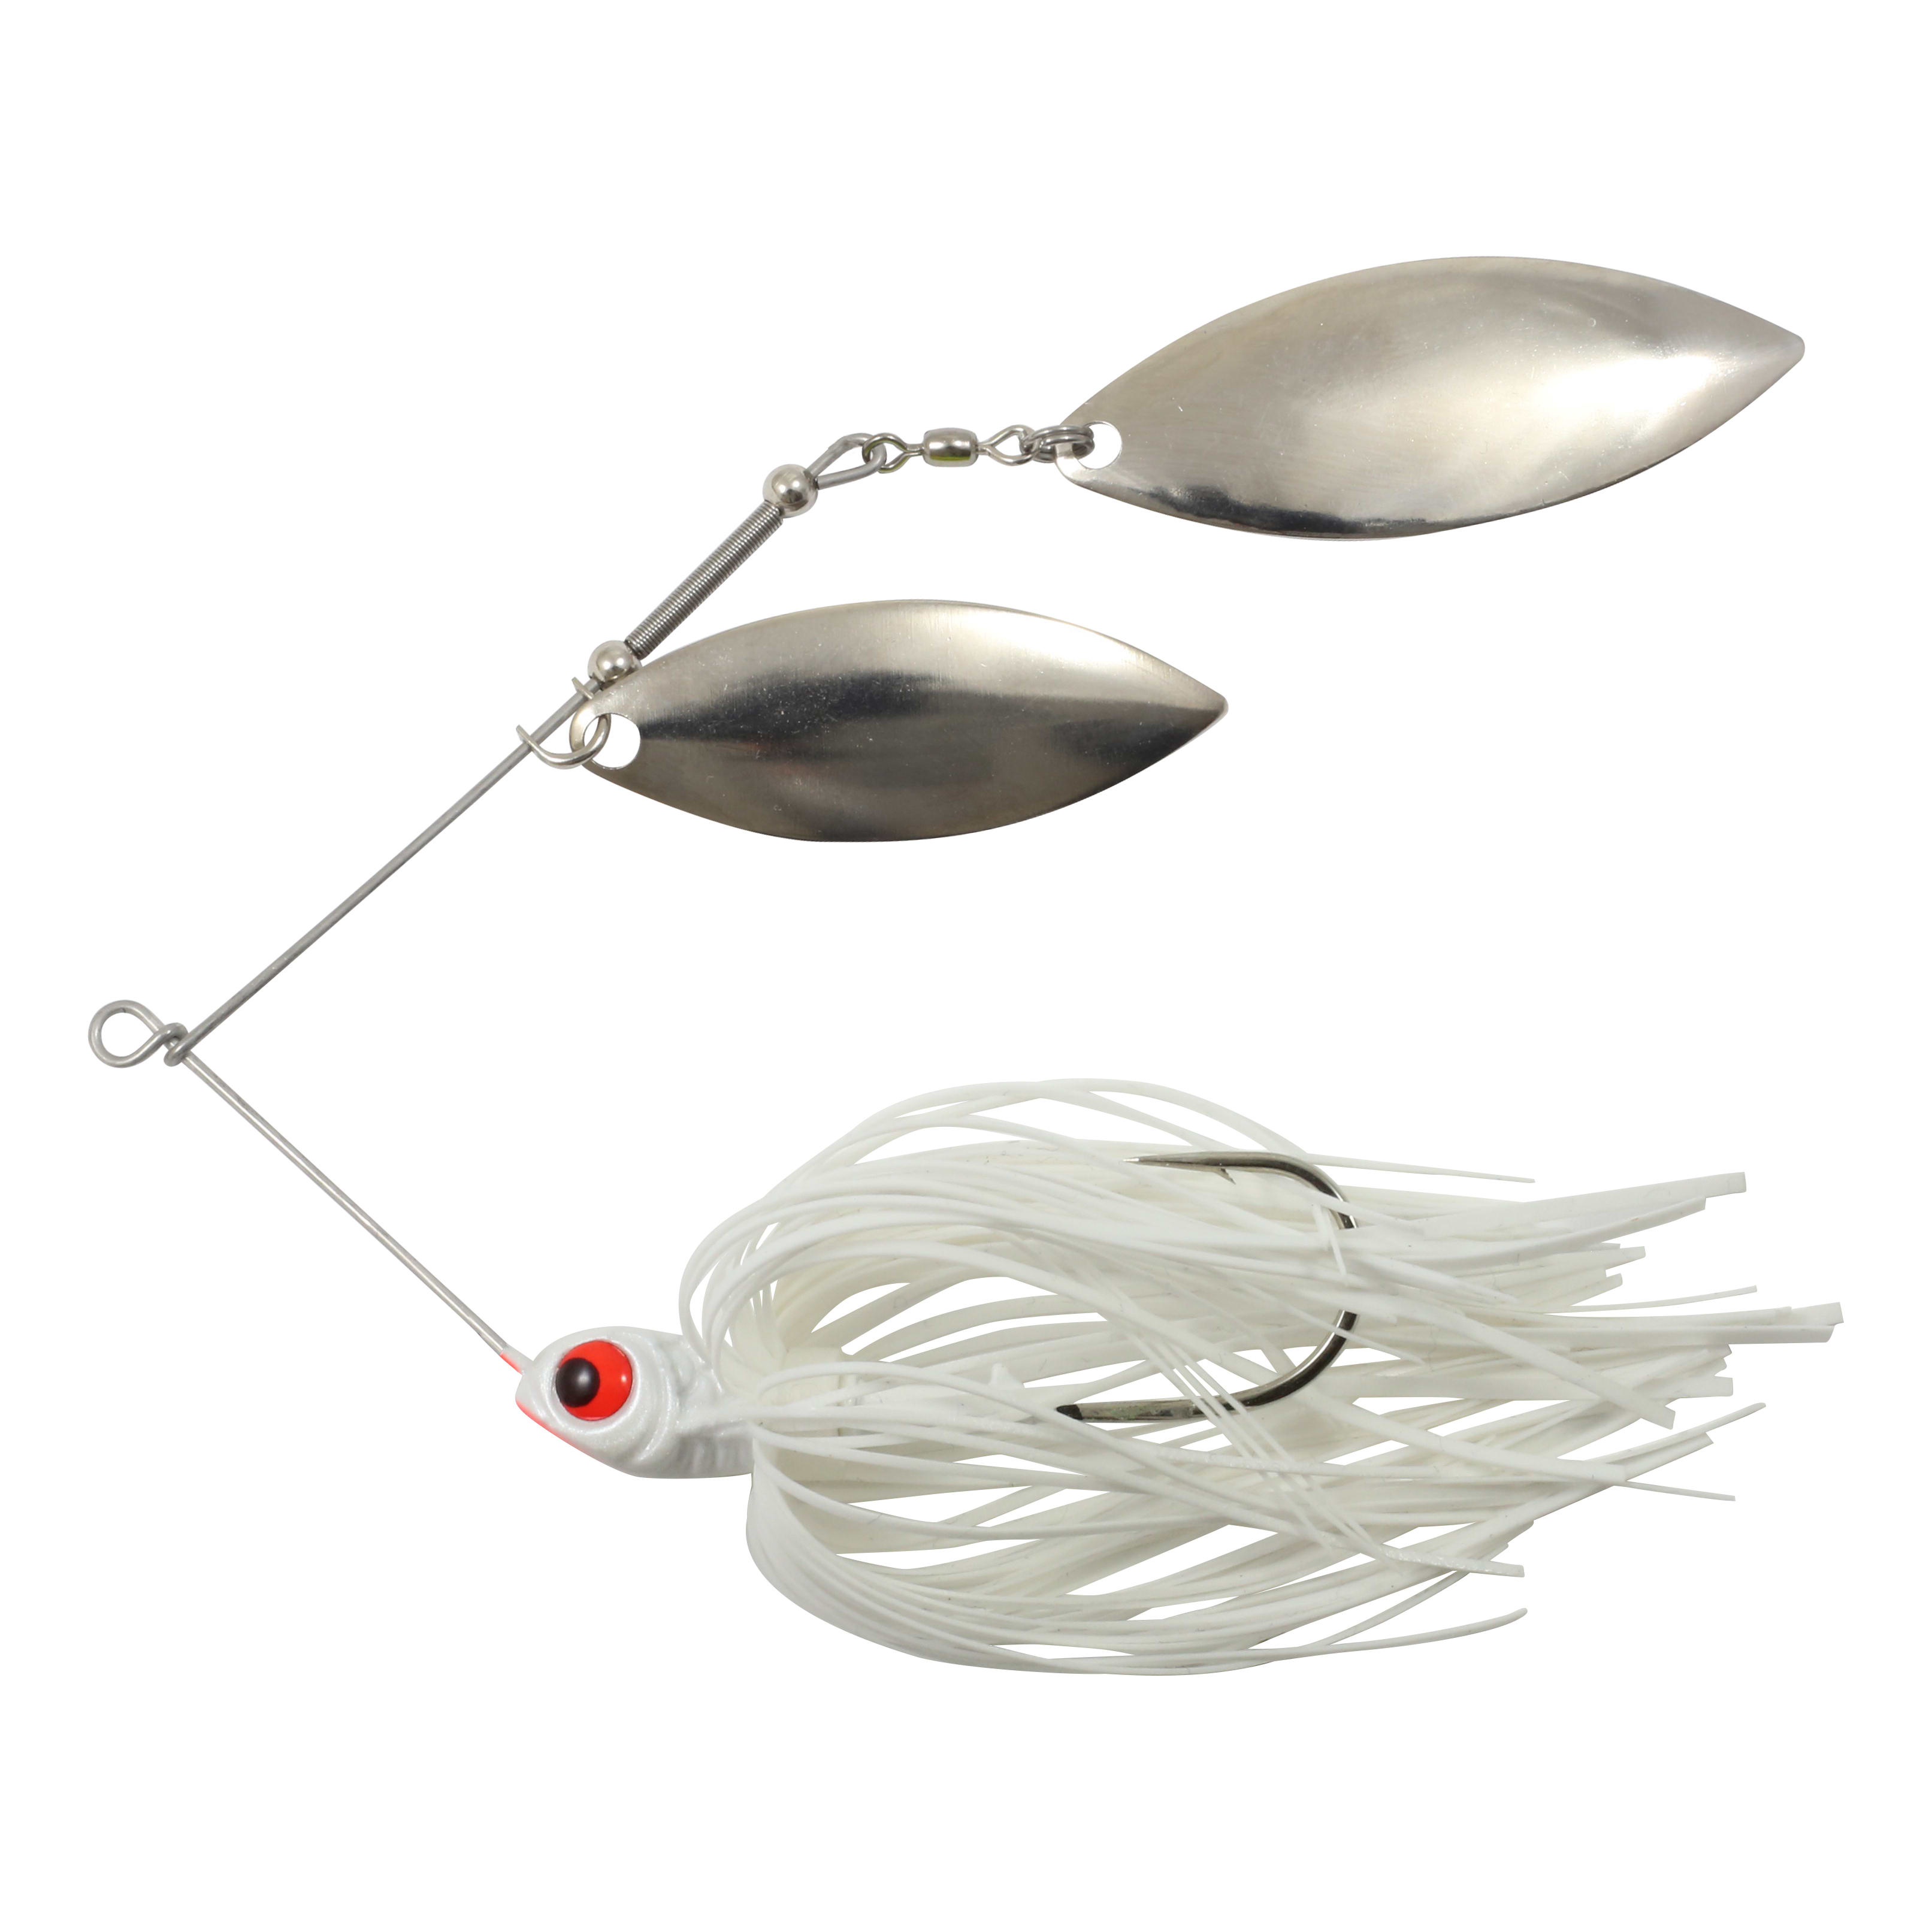 Spinner Bait Suppliers, all Quality Spinner Bait Suppliers on